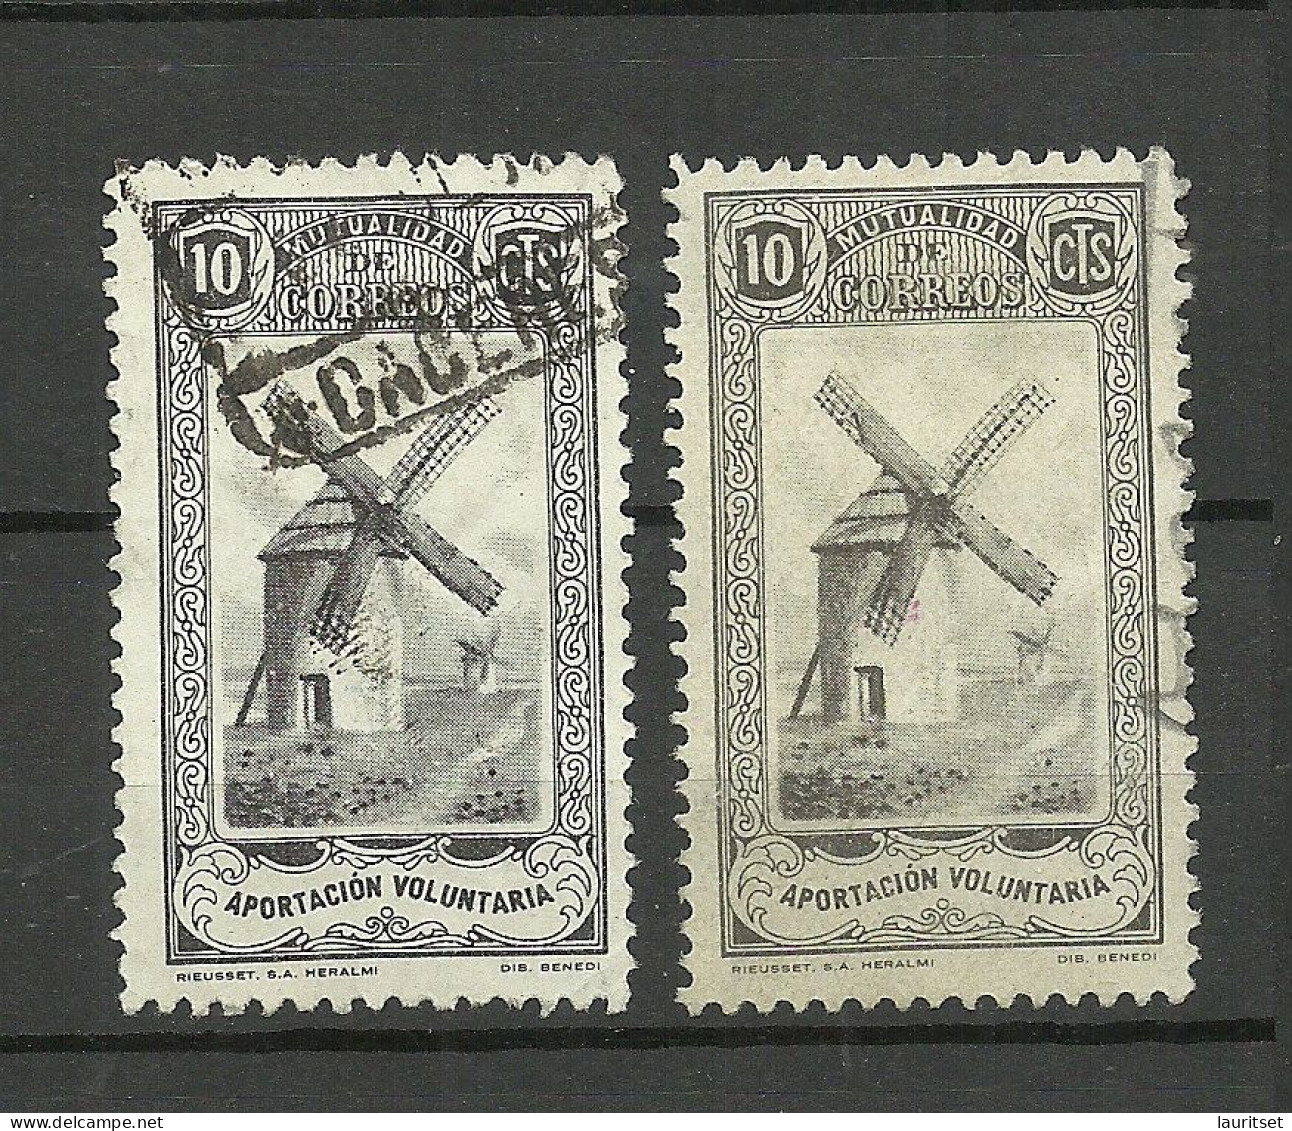 SPAIN Spanien Espana 1930ies Civil War Local Carity Wohlfahrt Wind Mill Windmühle - Color Chades, 2 Stamps, O - Moulins